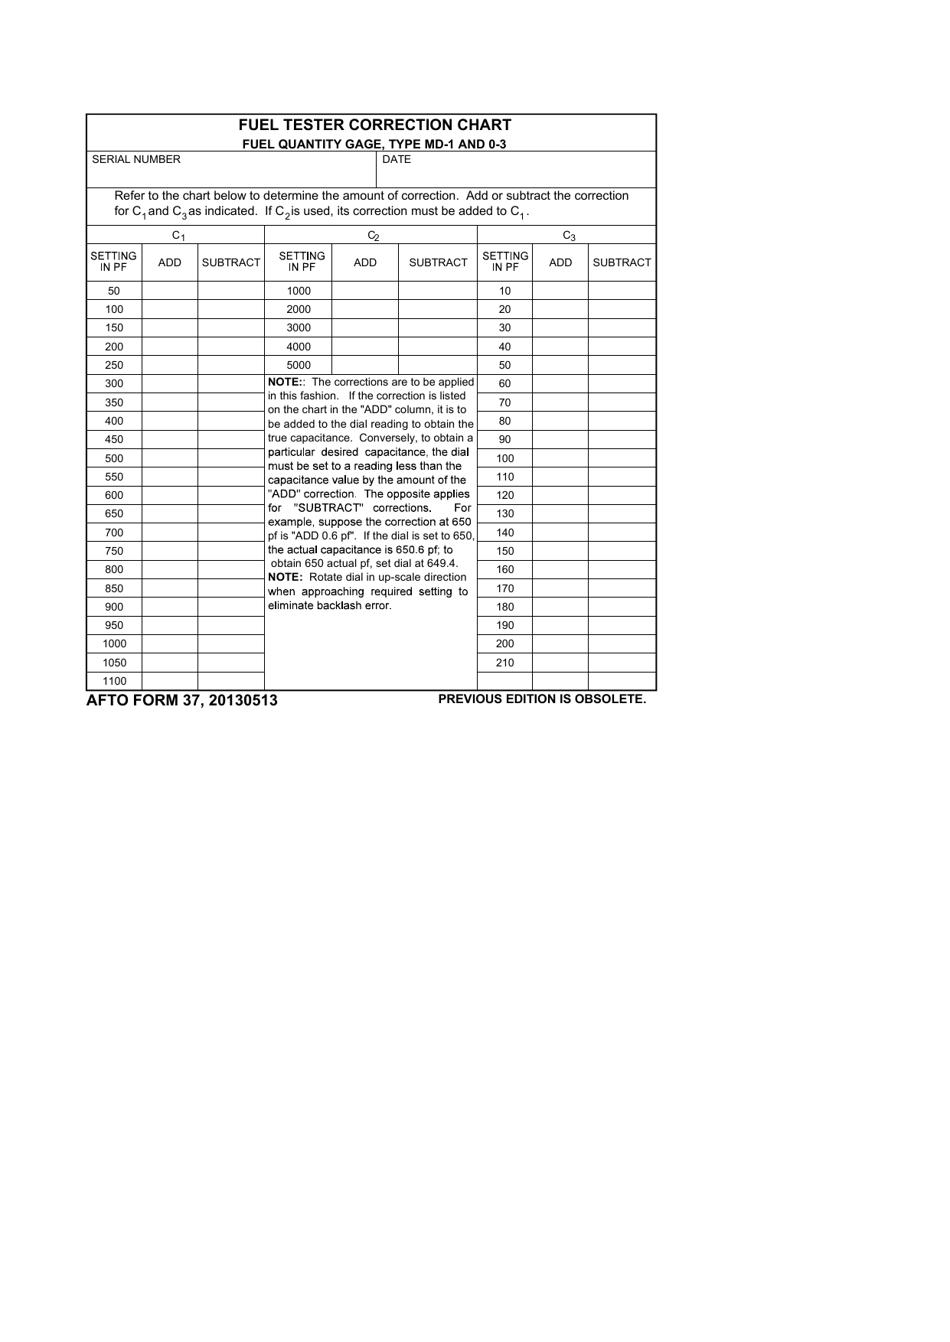 AFTO Form 37 Fuel Tester Correction Chart - Fuel Quantity Gage, Type Md-1 and 0-3, Page 1